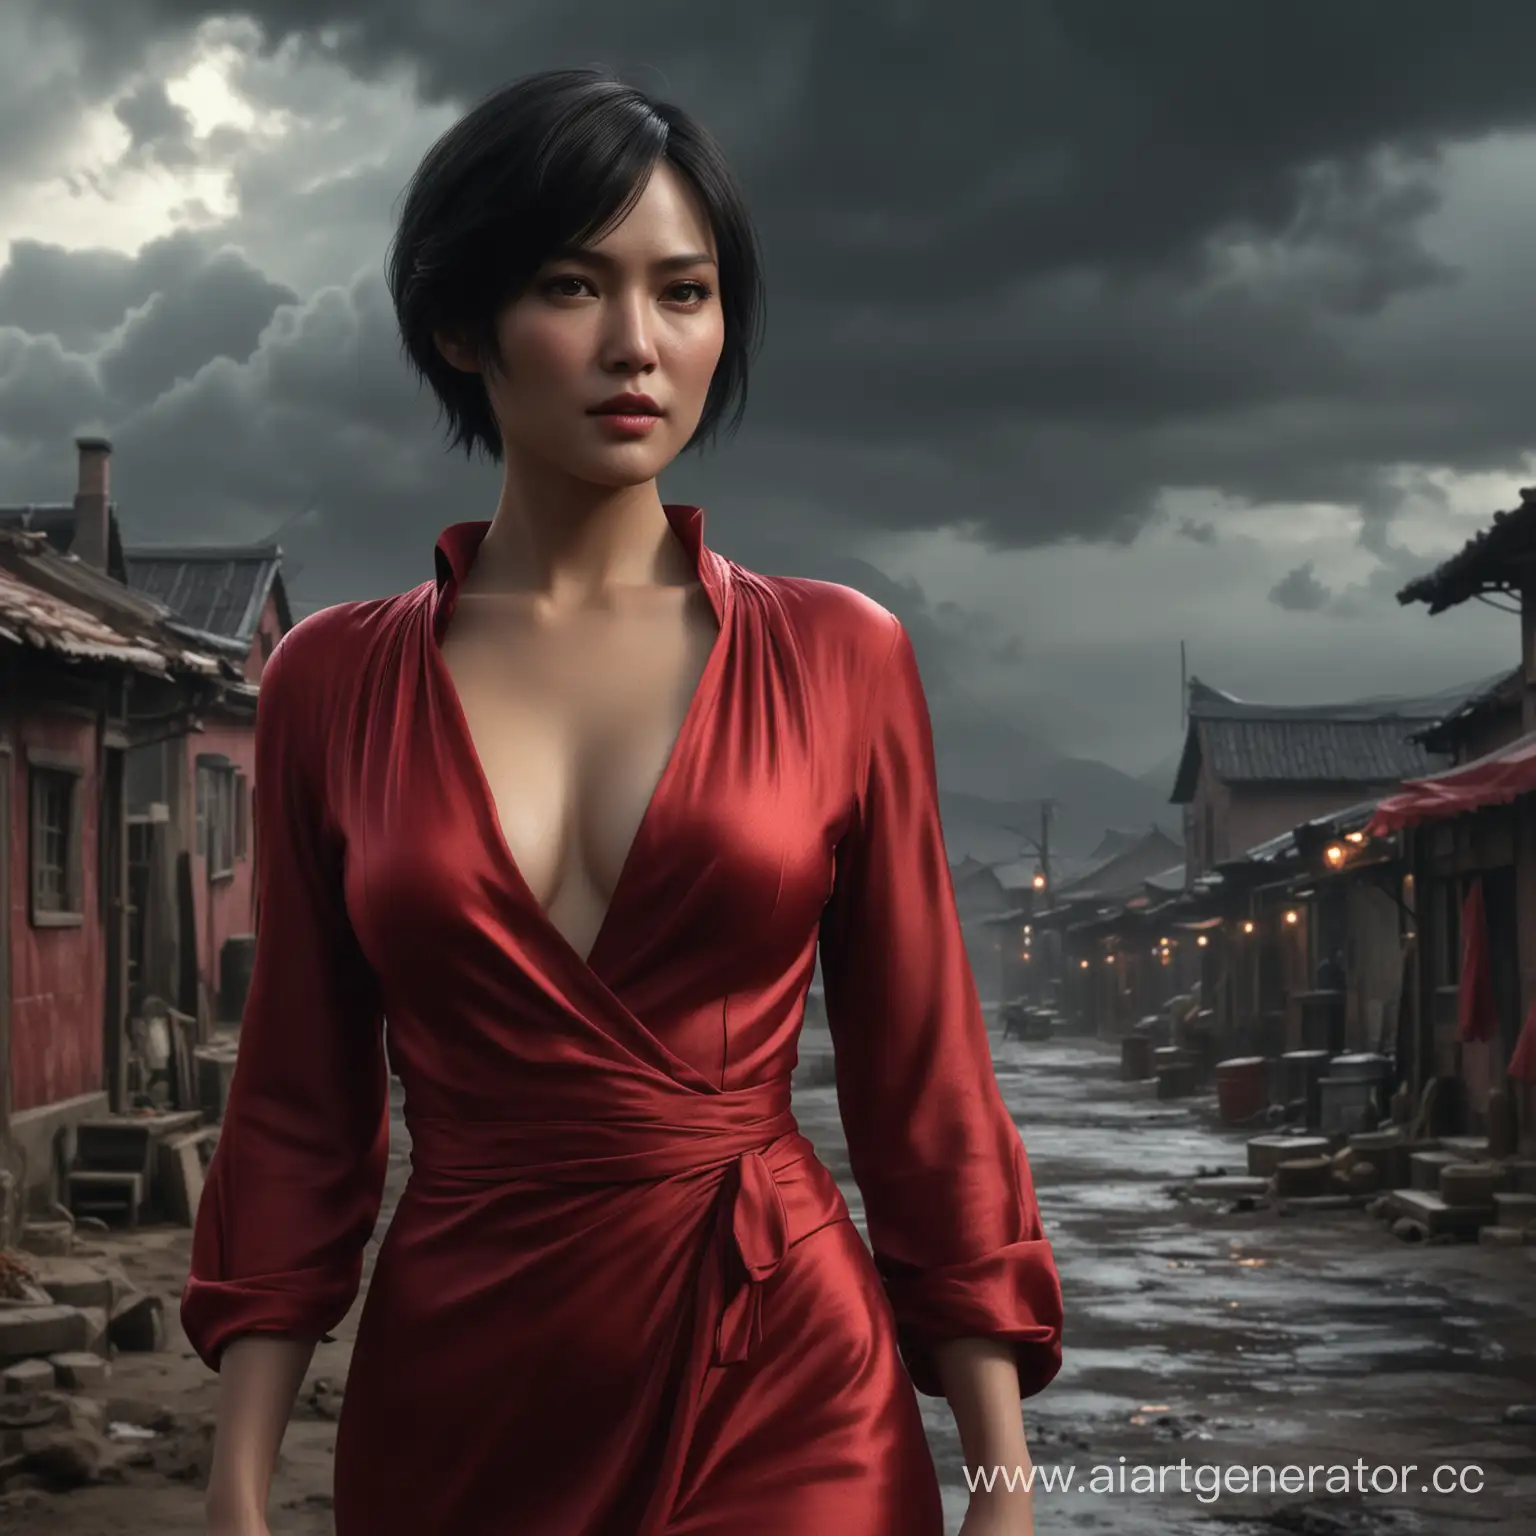 Ada Wong, in a swaying long red silk dress, stands tall against a desolate village, overcast and somber skies compose the backdrop, her hair lifted by the brisk air, mystery and allure in her stance, capturing a sense of fortitude amidst a setting filled with foreboding, chiaroscuro lighting, ultra realistic, cinematic, UHD drawing.